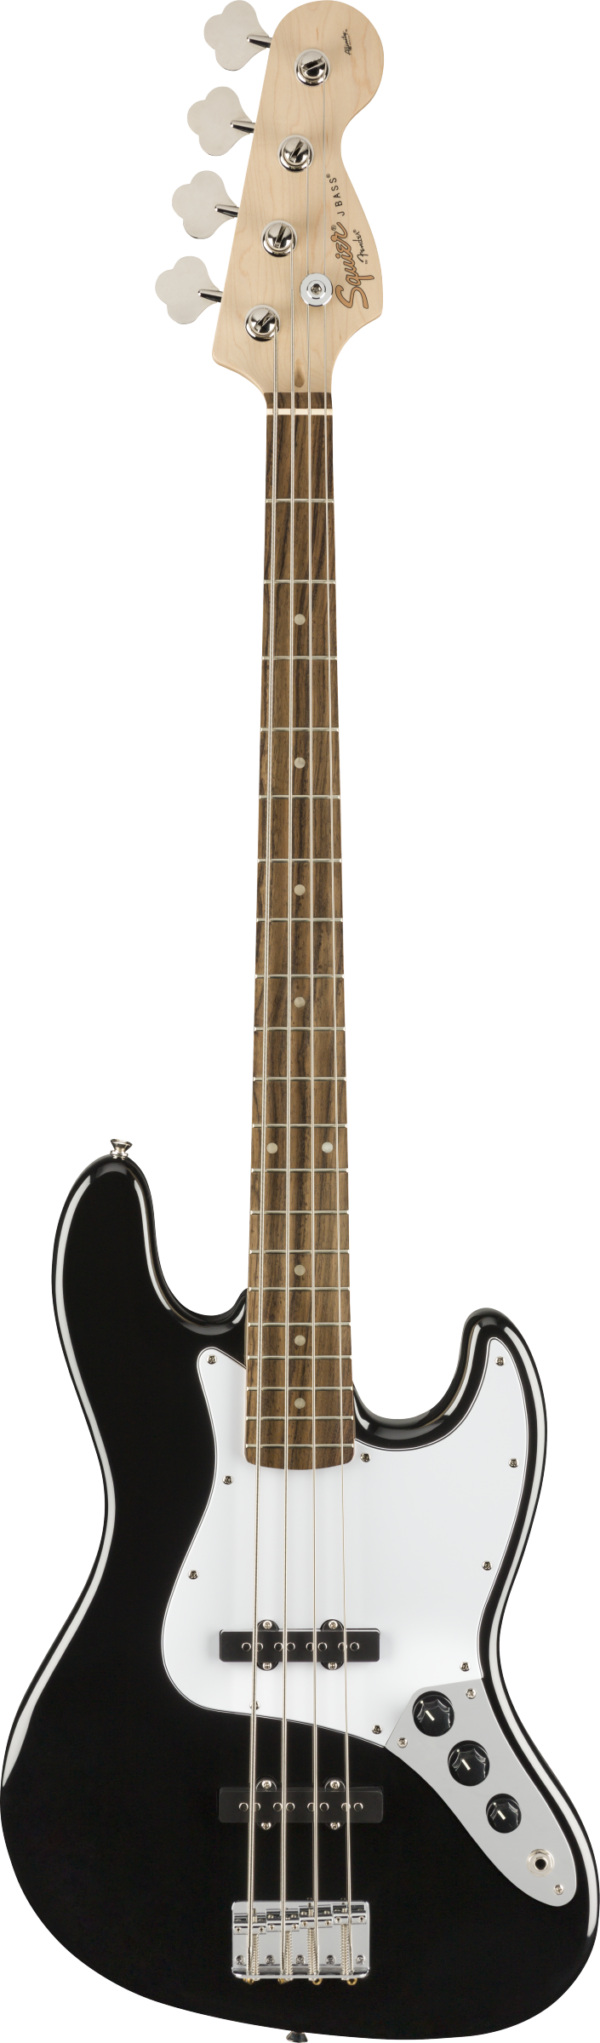 Squier Affinity J Bass